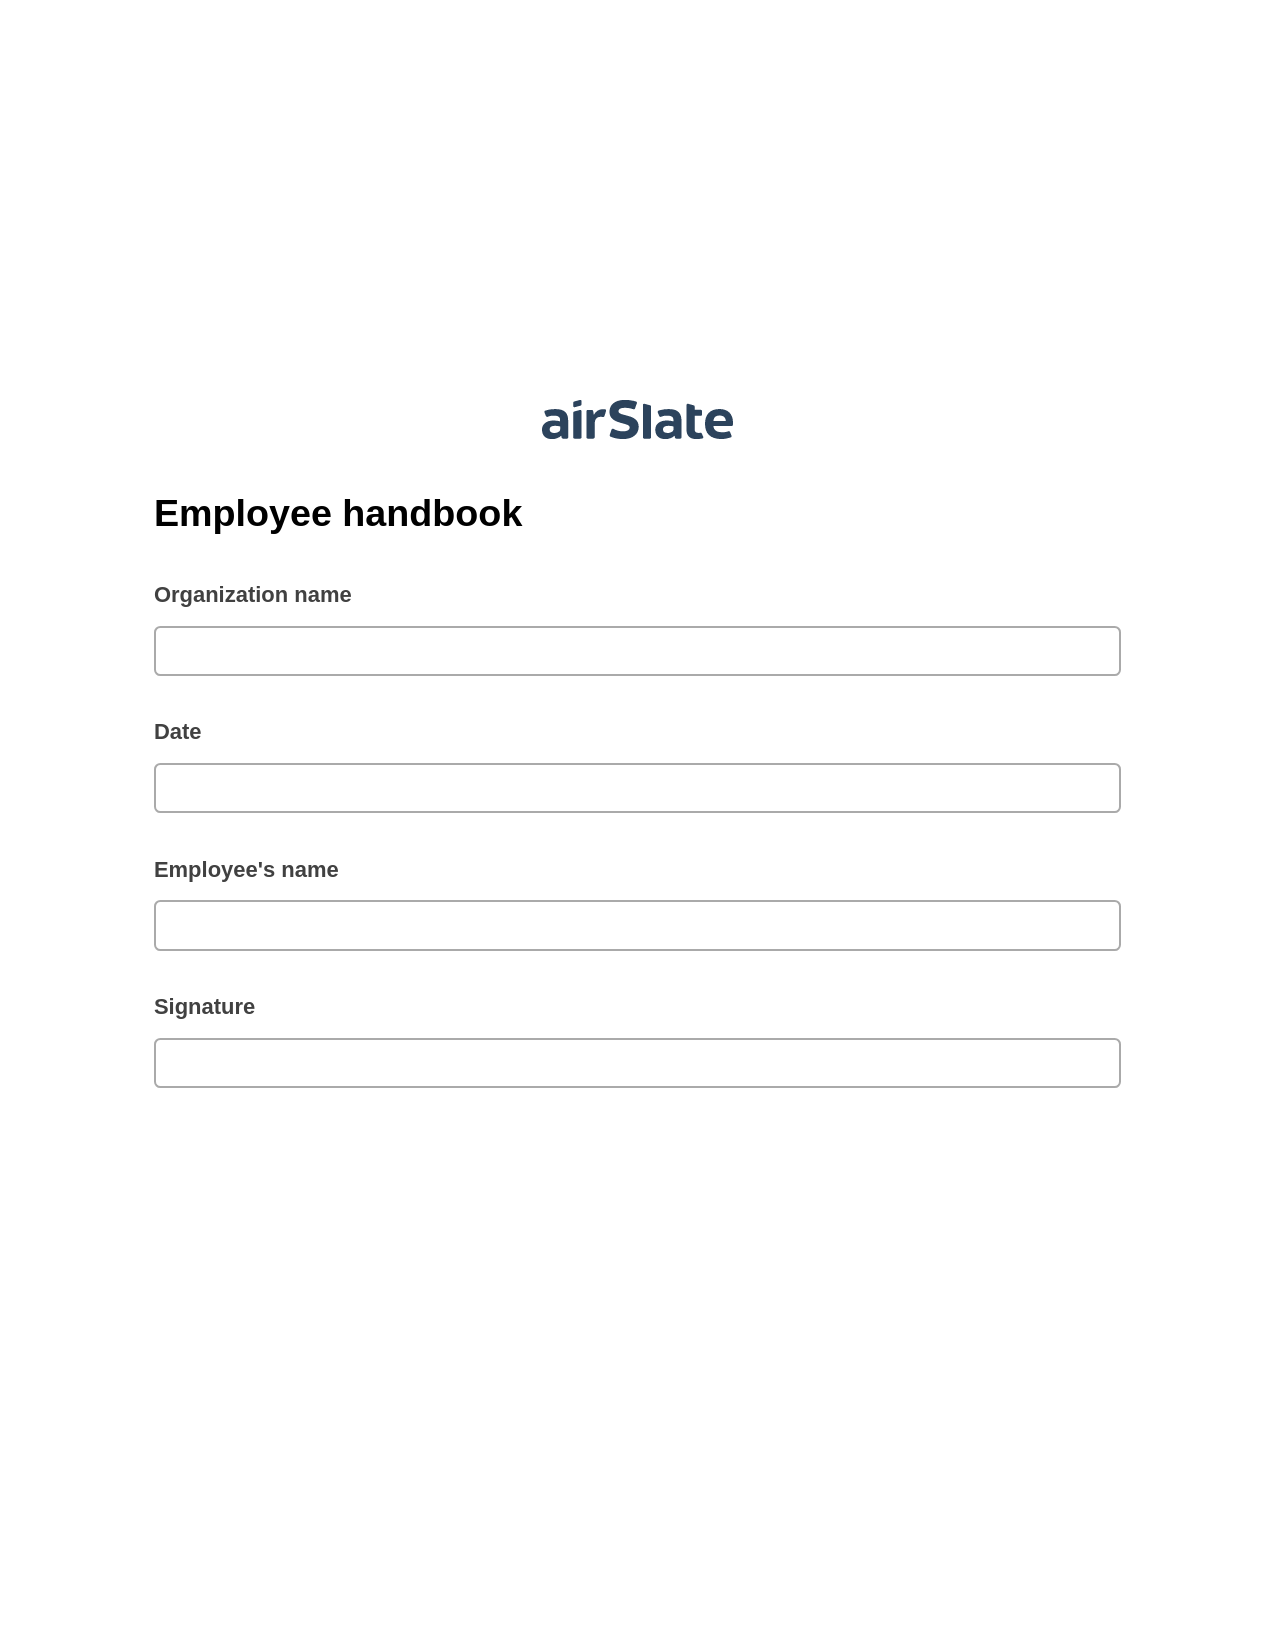 Employee handbook Pre-fill from CSV File Bot, Document Hide Bot, Text Message Notification Postfinish Bot